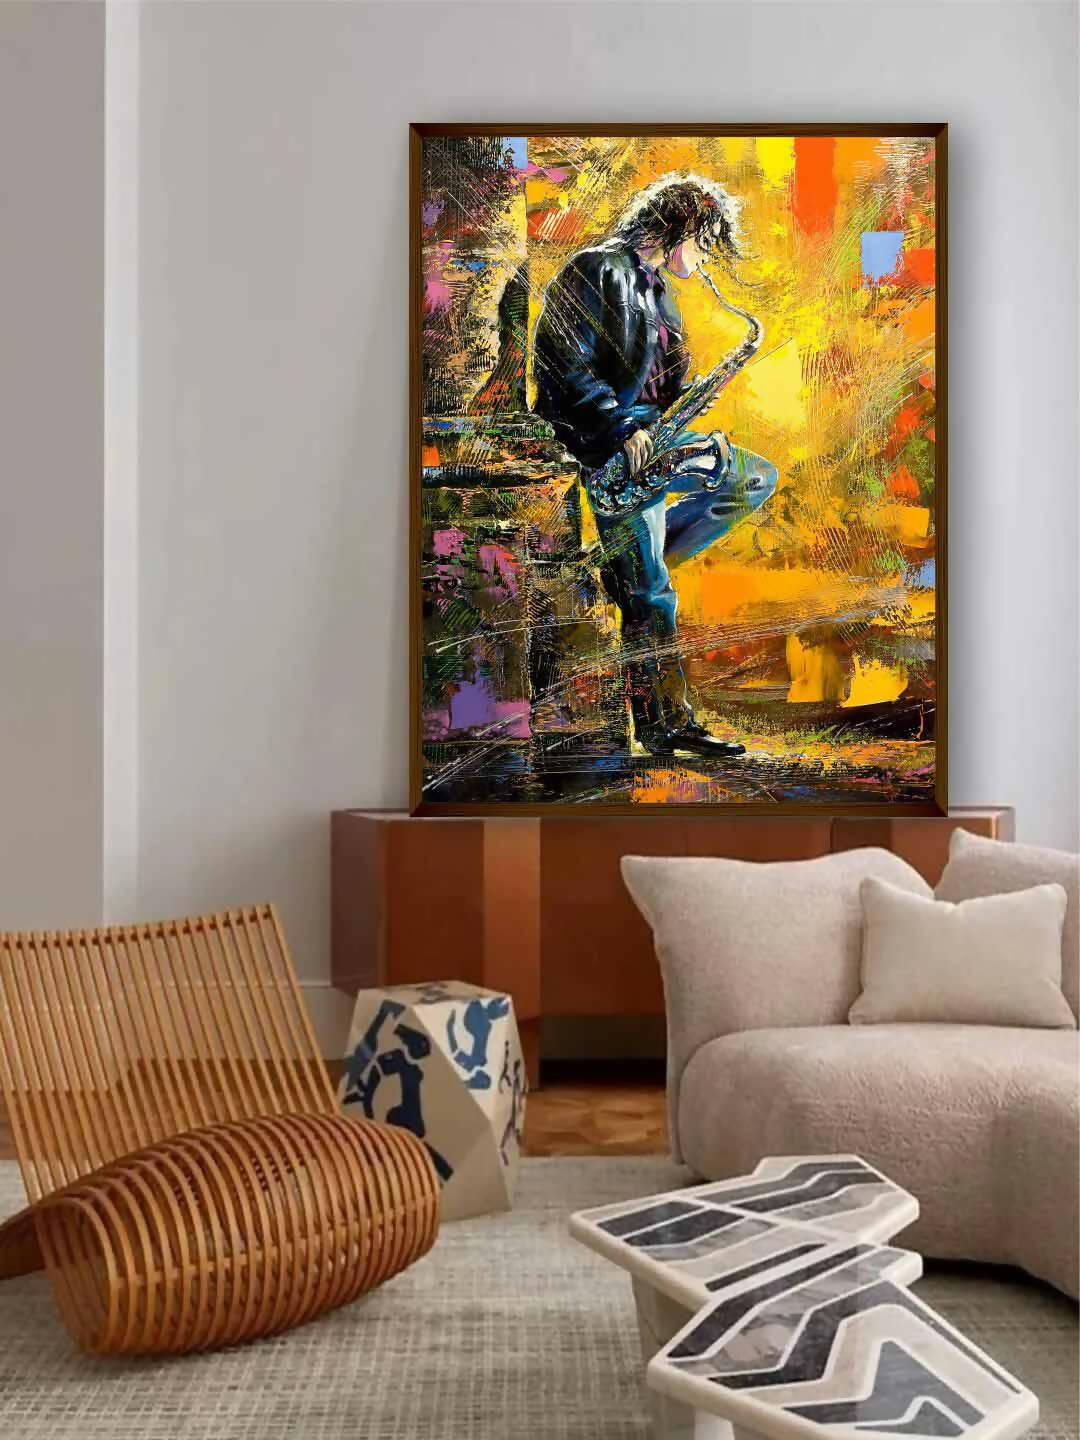 A Young Man Playing a Saxophone - Wall Decor - 1